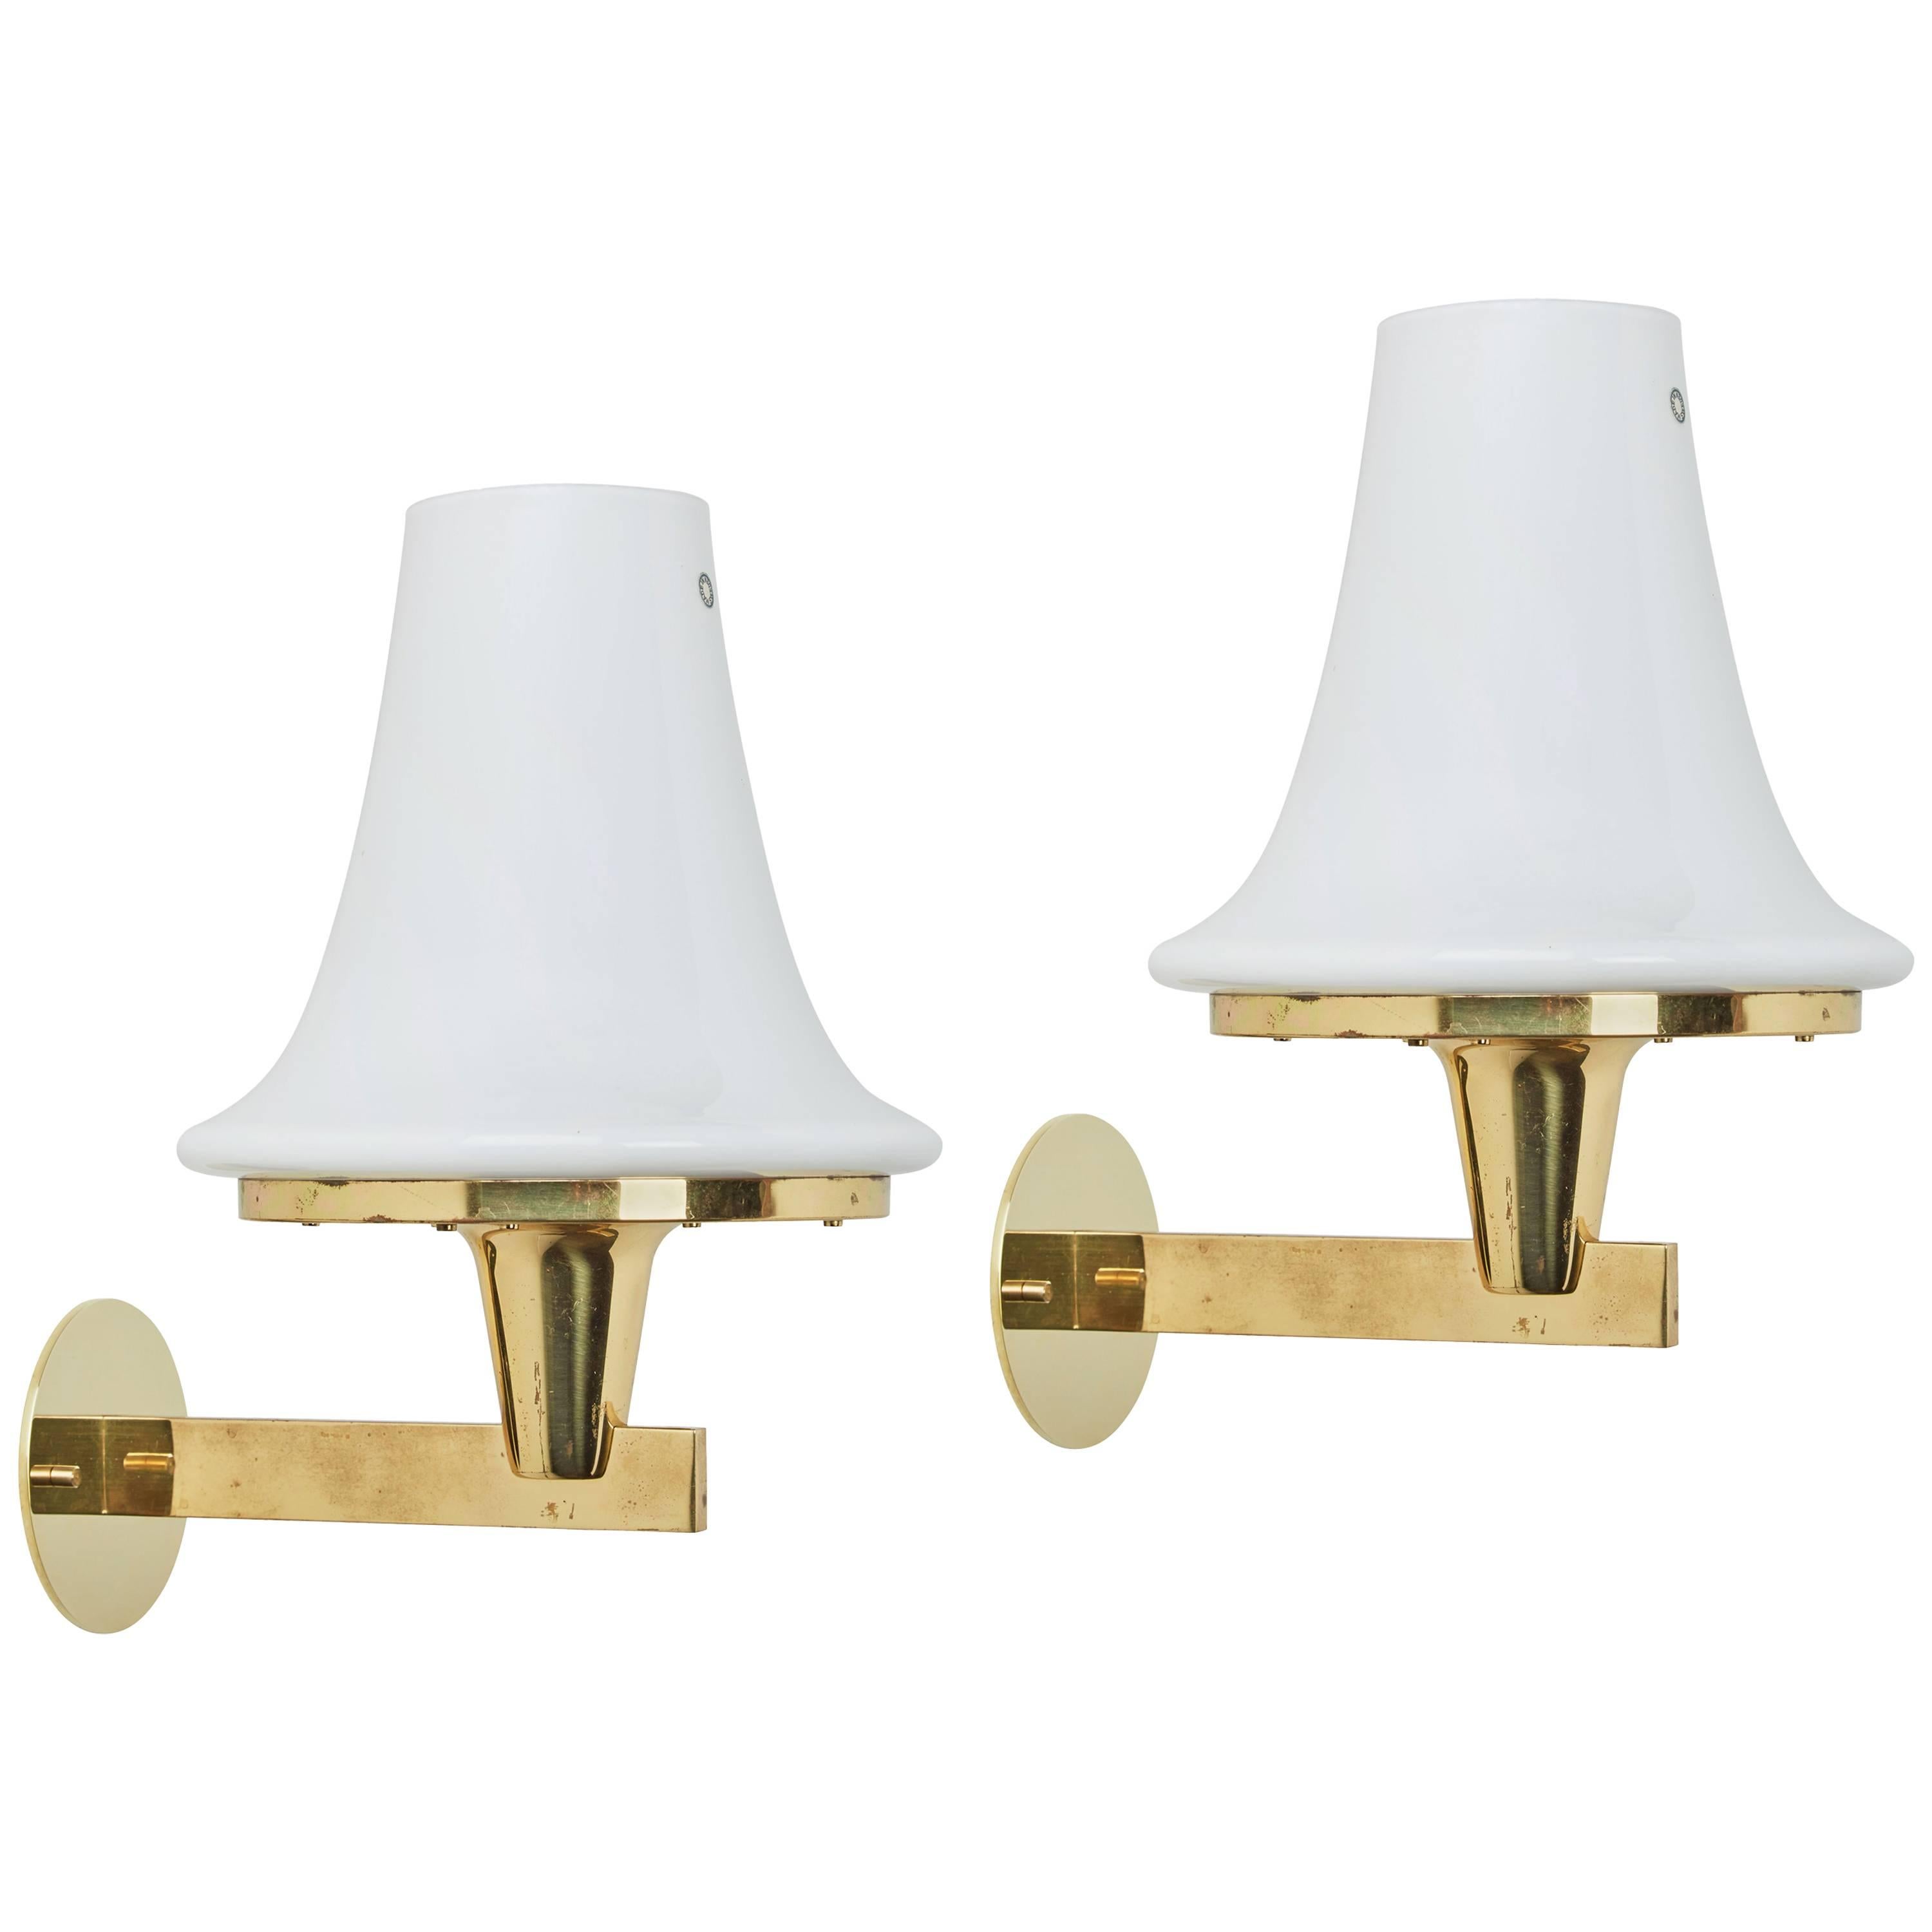 Pair of Brass and Glass Sconces by Hans Agne Jakobsson, Markaryd